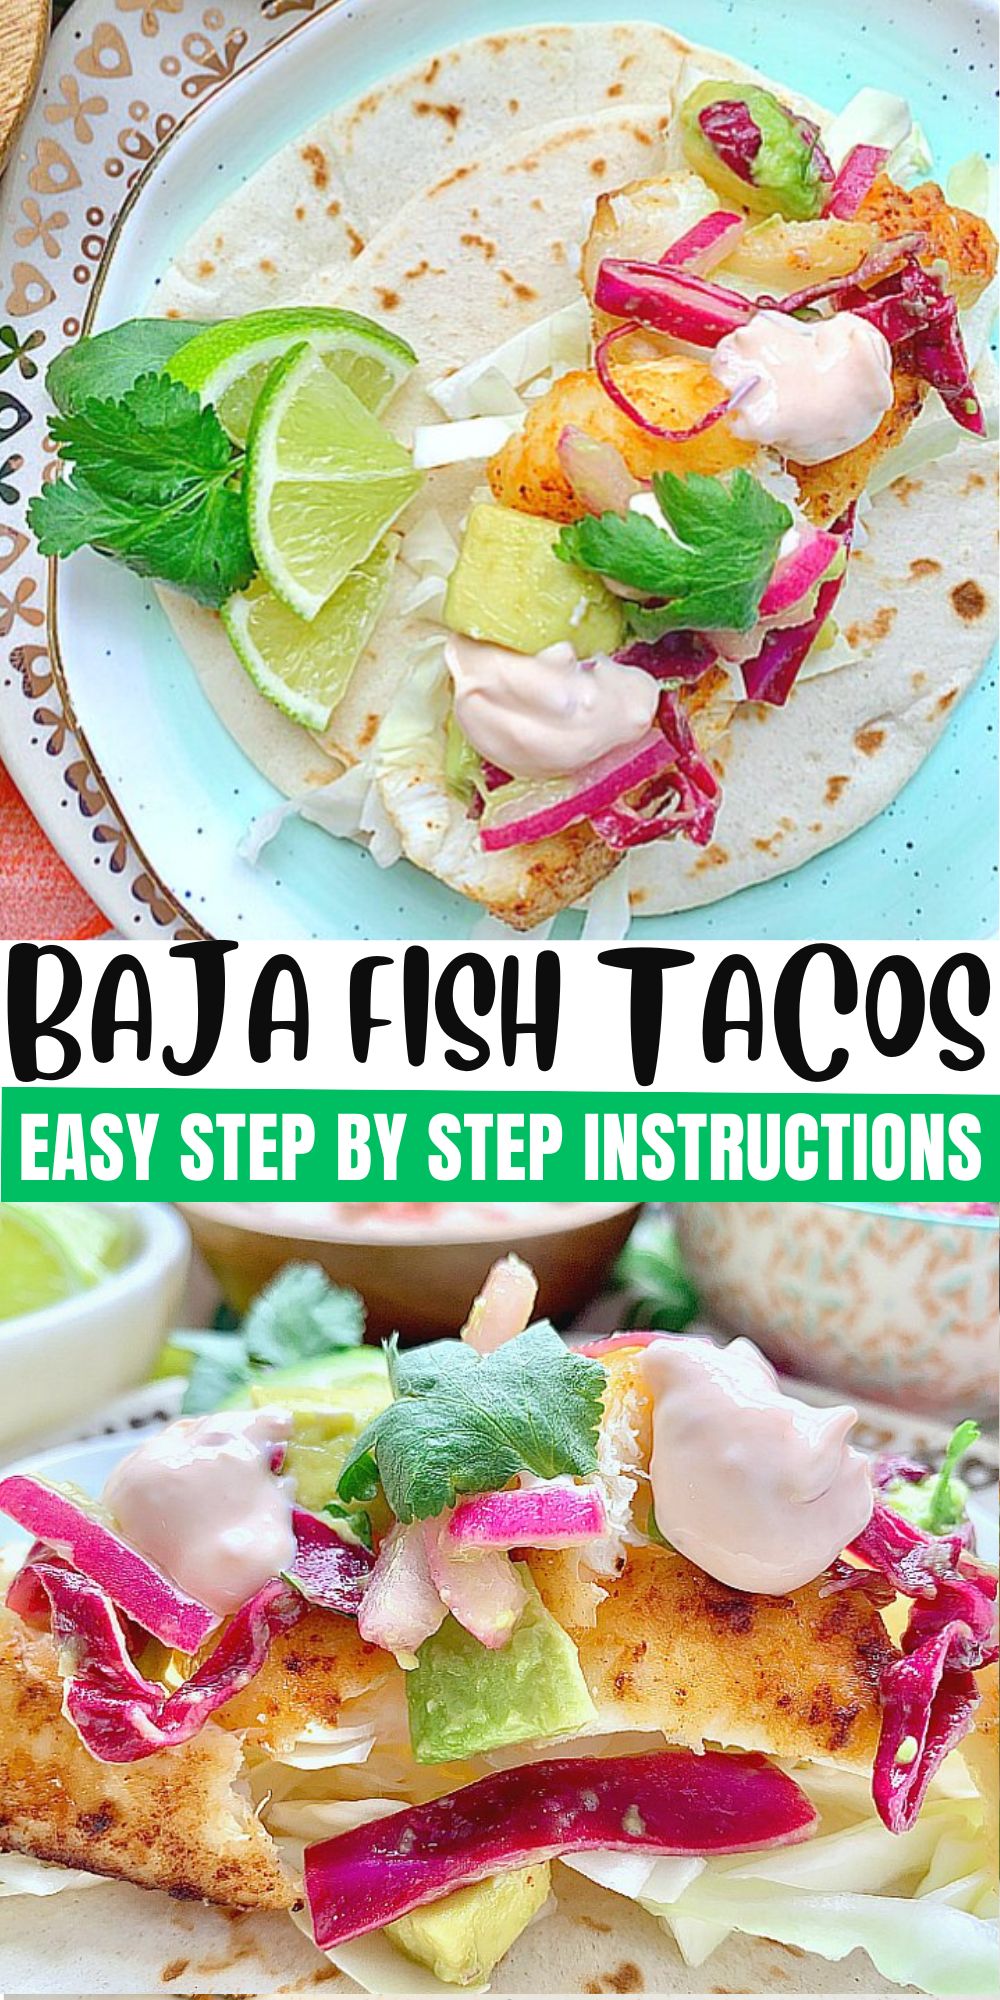 Perfectly seasoned halibut combines with a quick pickled avocado salsa, shredded cabbage and a creamy white sauce for these Baja Fish Tacos that are simply the best. via @foodtasticmom